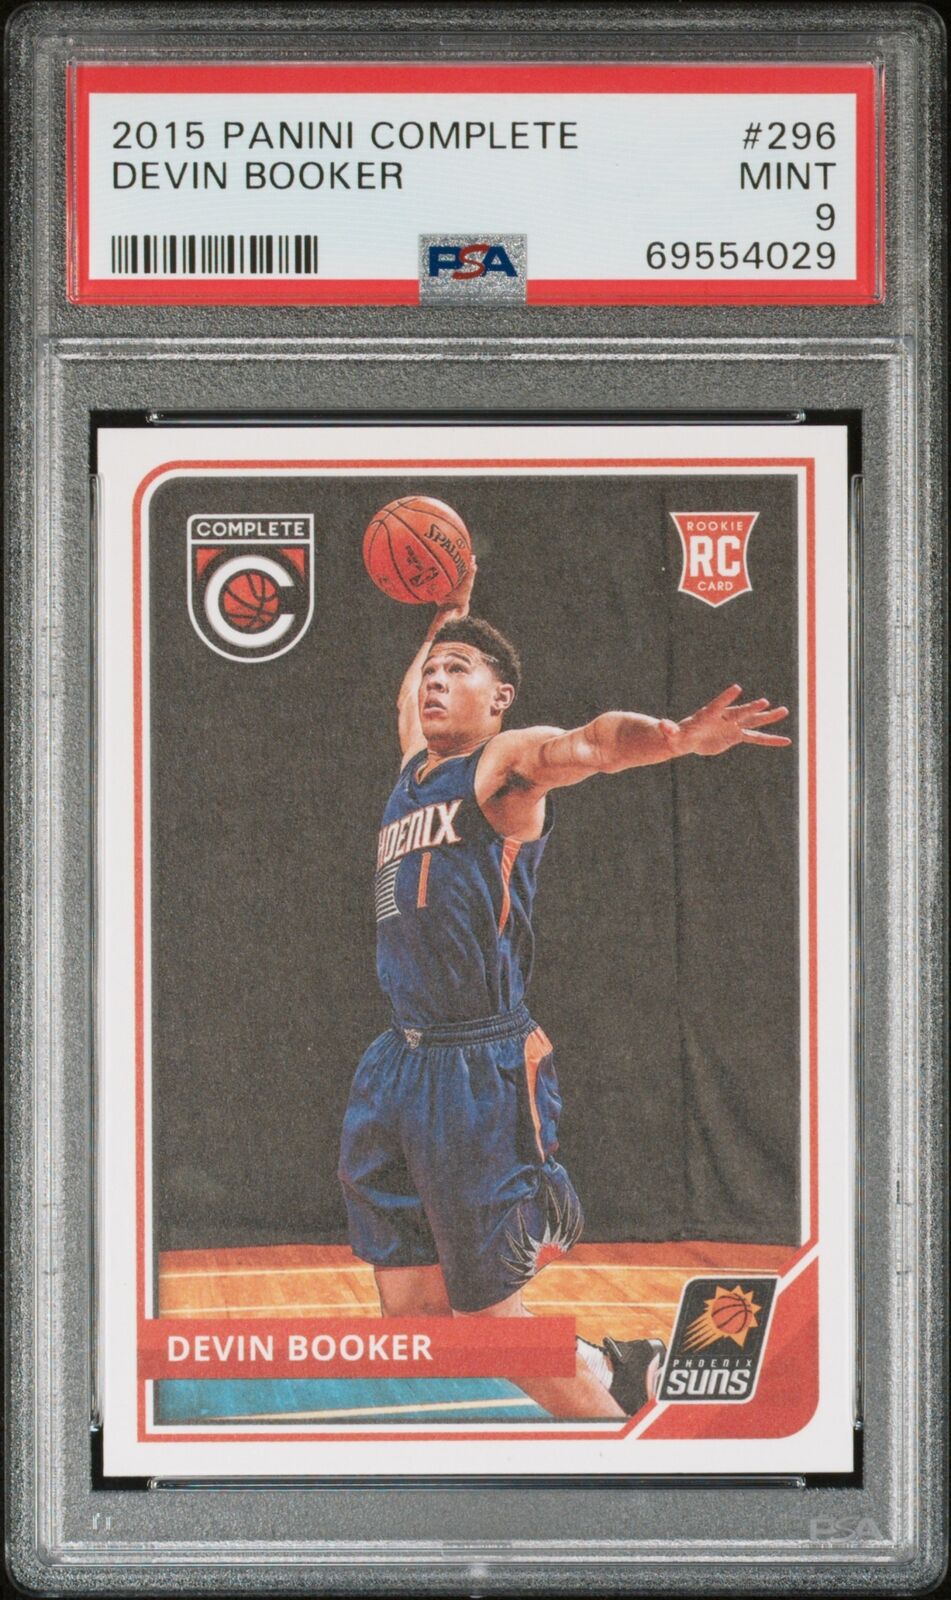 Devin Booker 2015 Panini Complete Basketball Rookie Card RC #296 Graded PSA 9